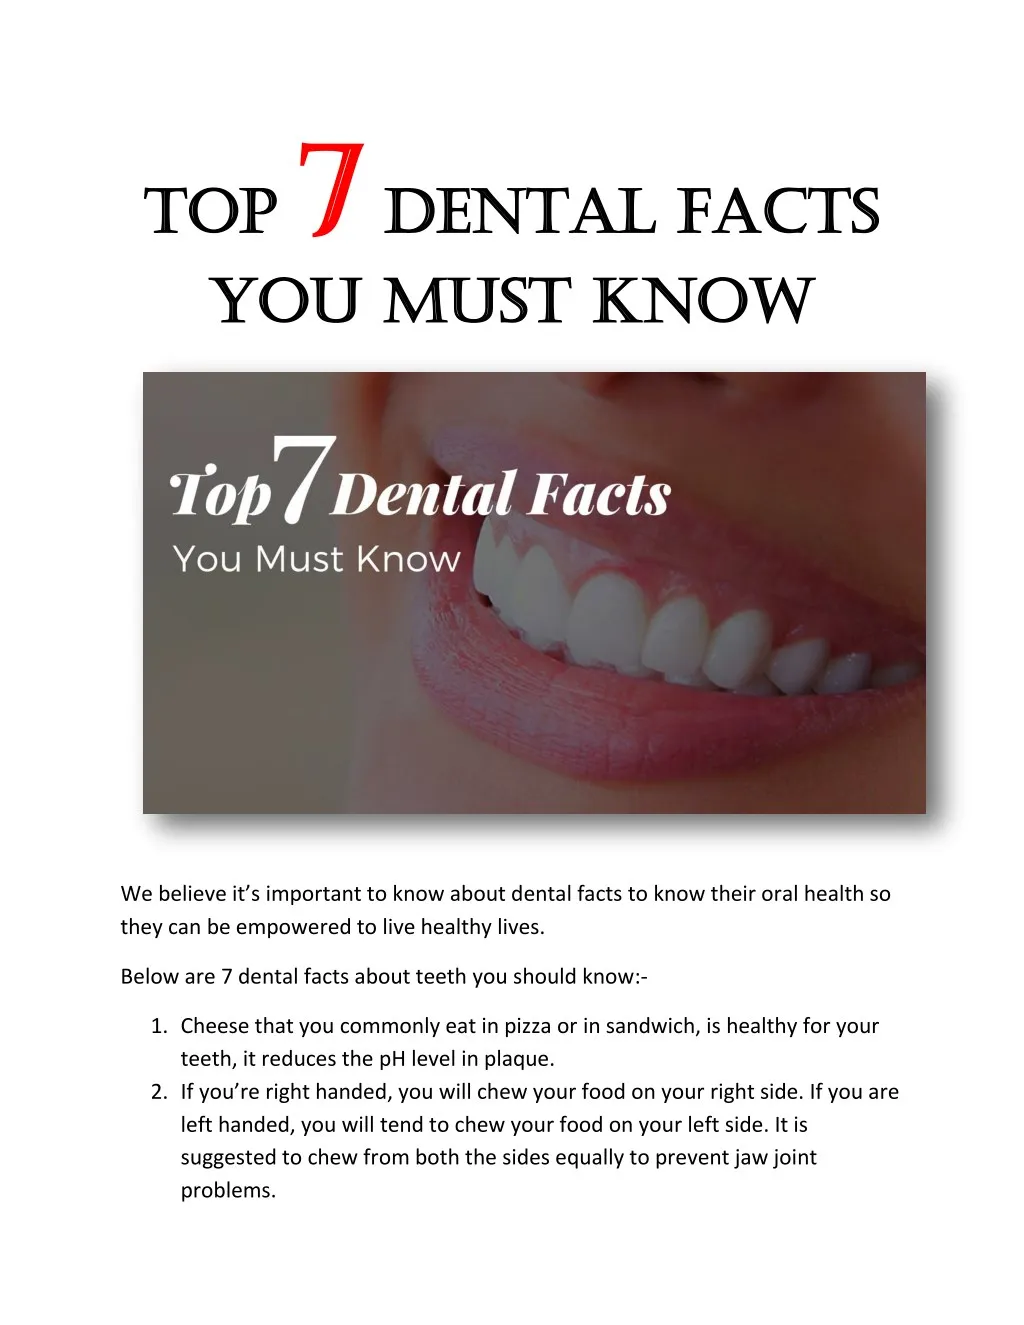 top 7 7 dental facts dental facts